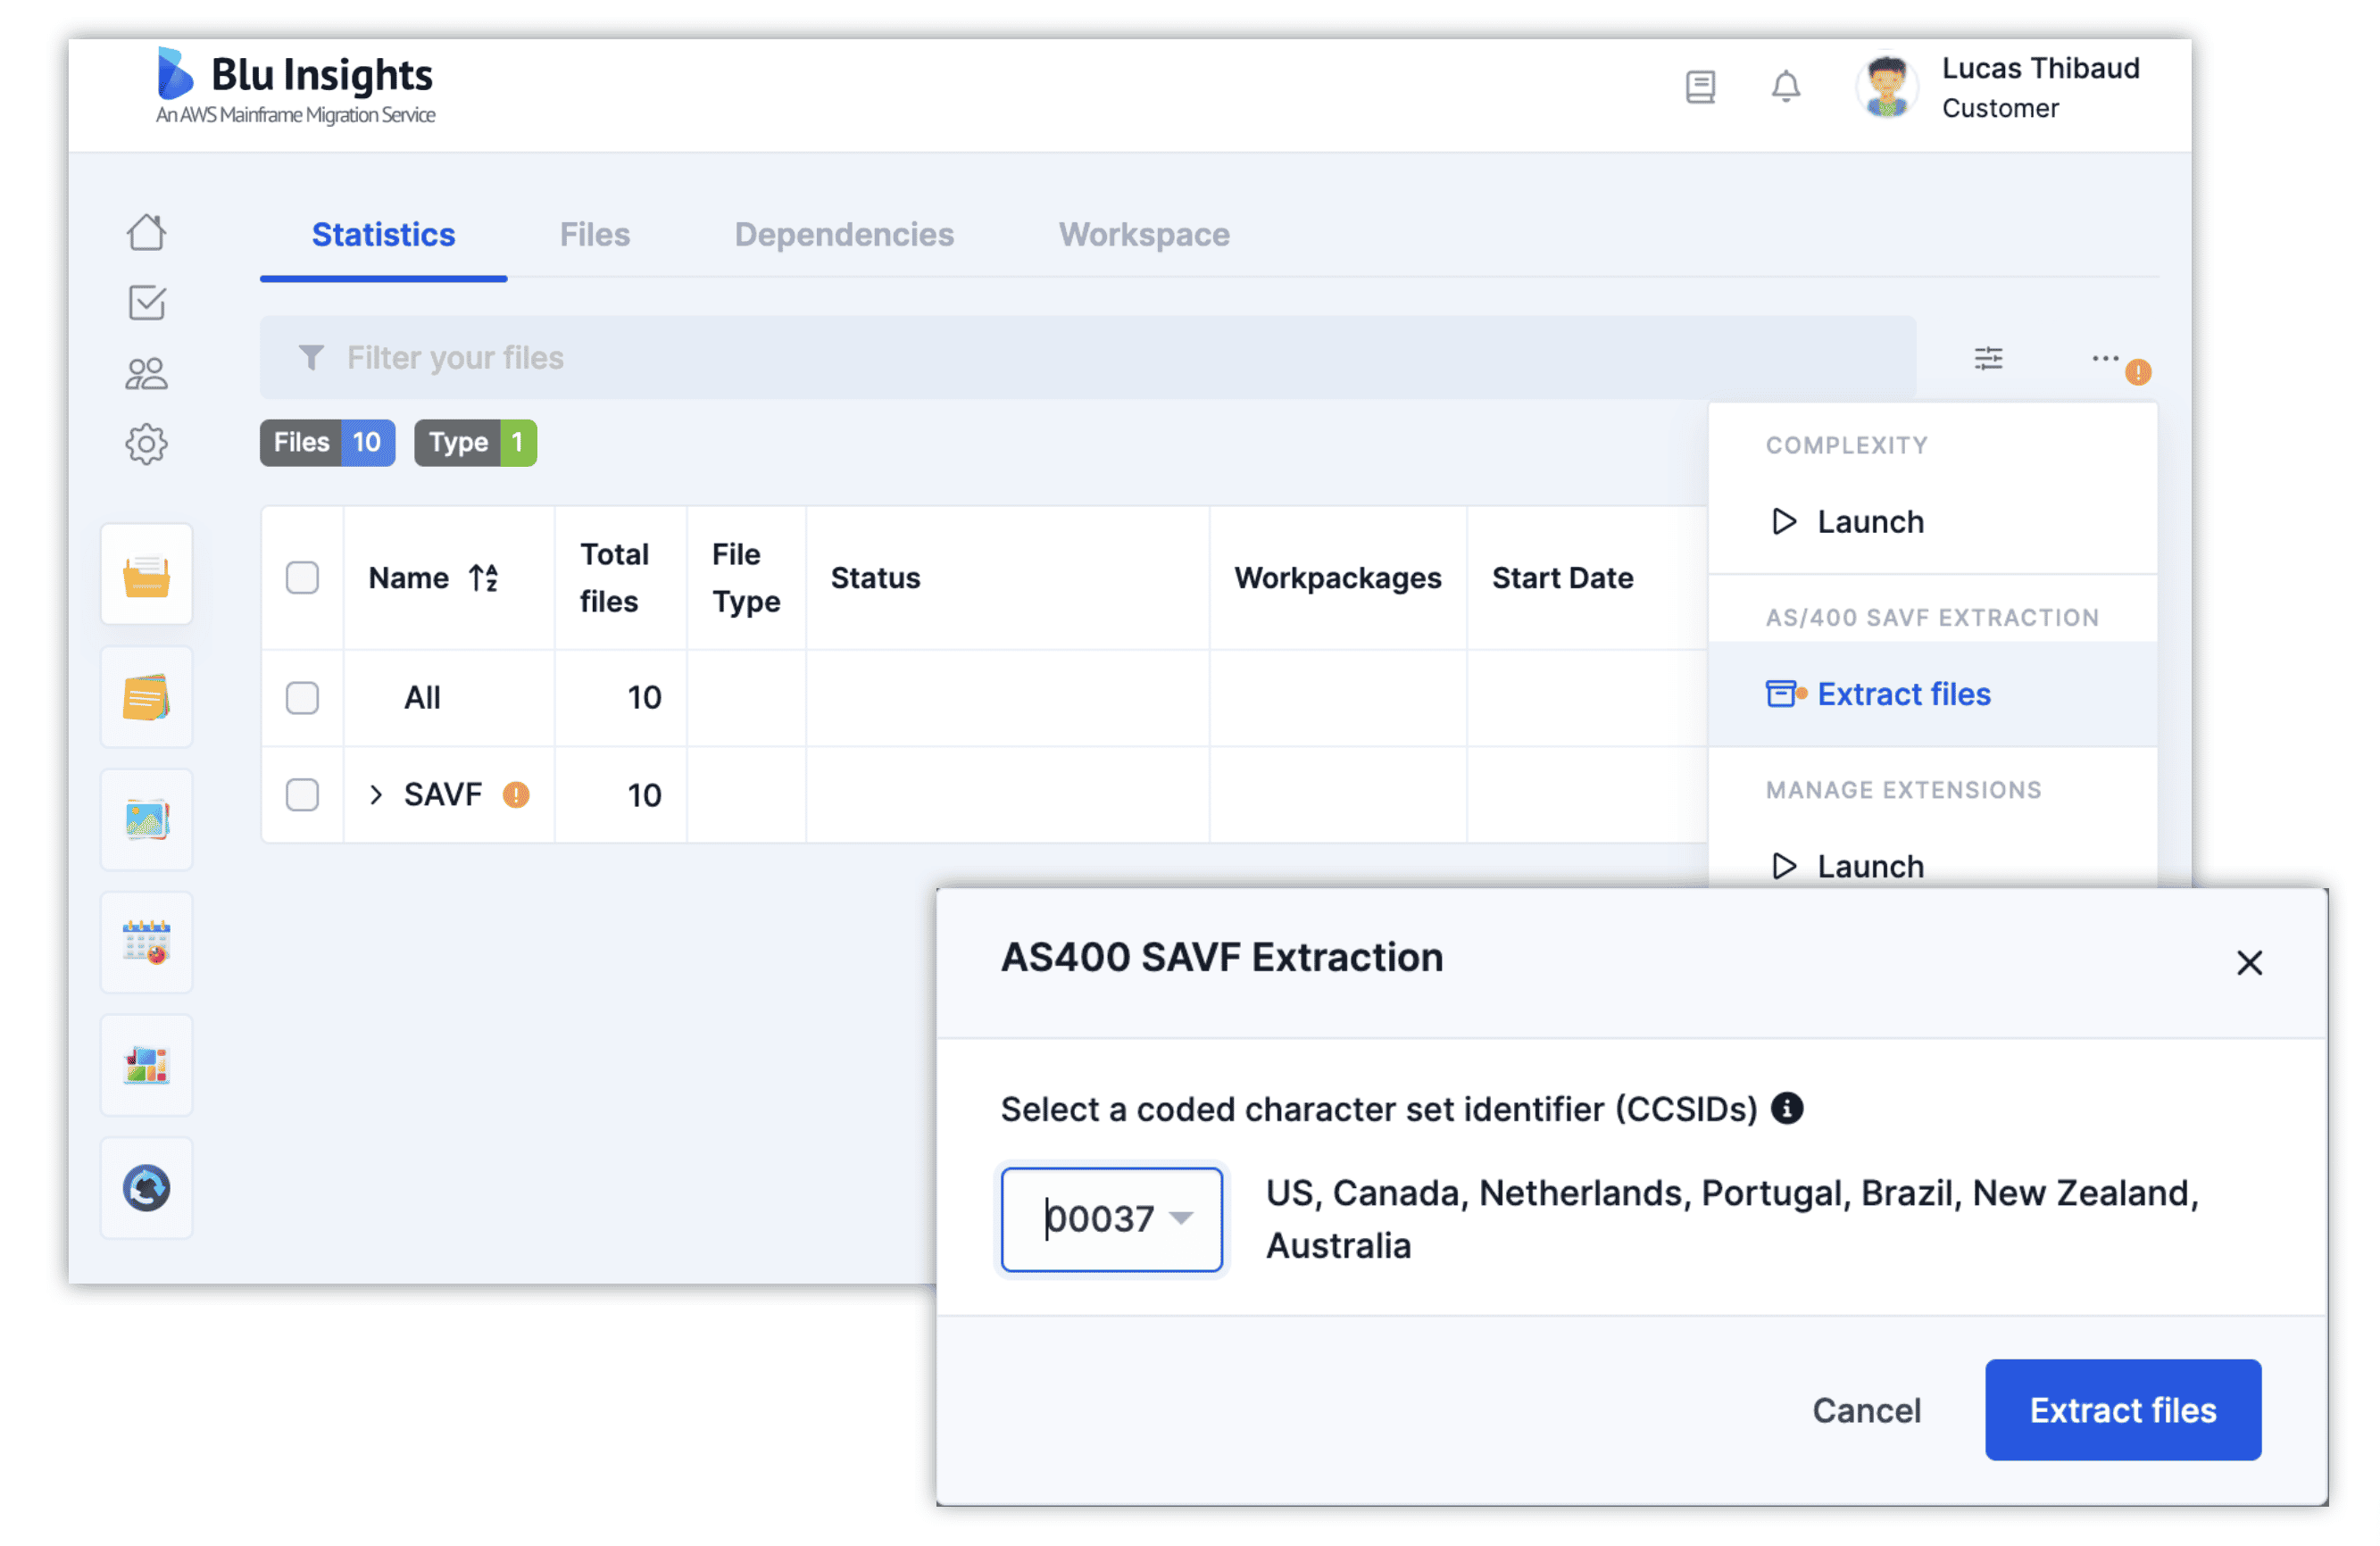 pop up allowing the user to select the CCSID required for SAVF extraction